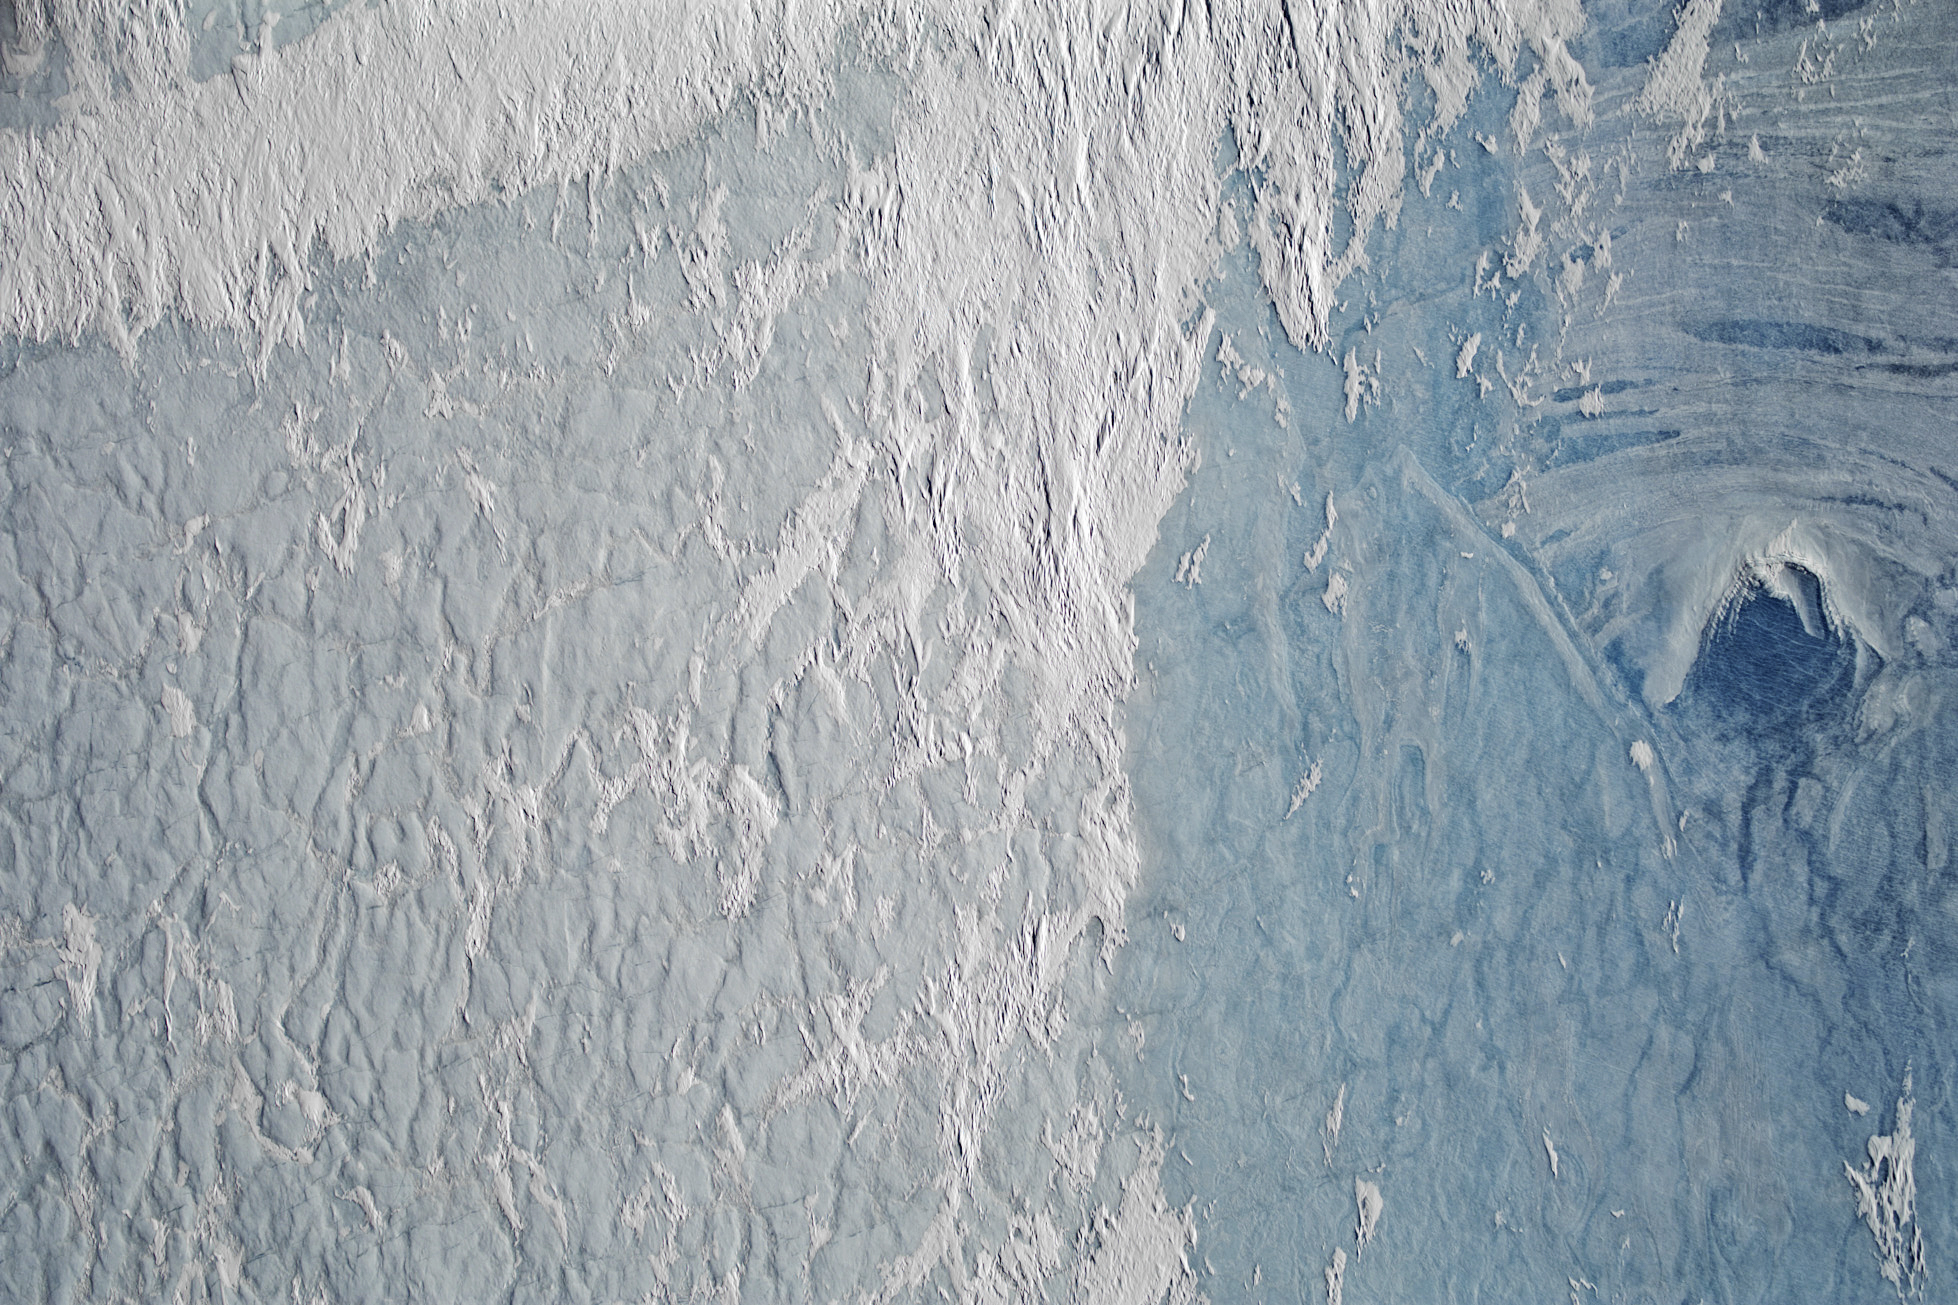 Greenland Refrozen - related image preview